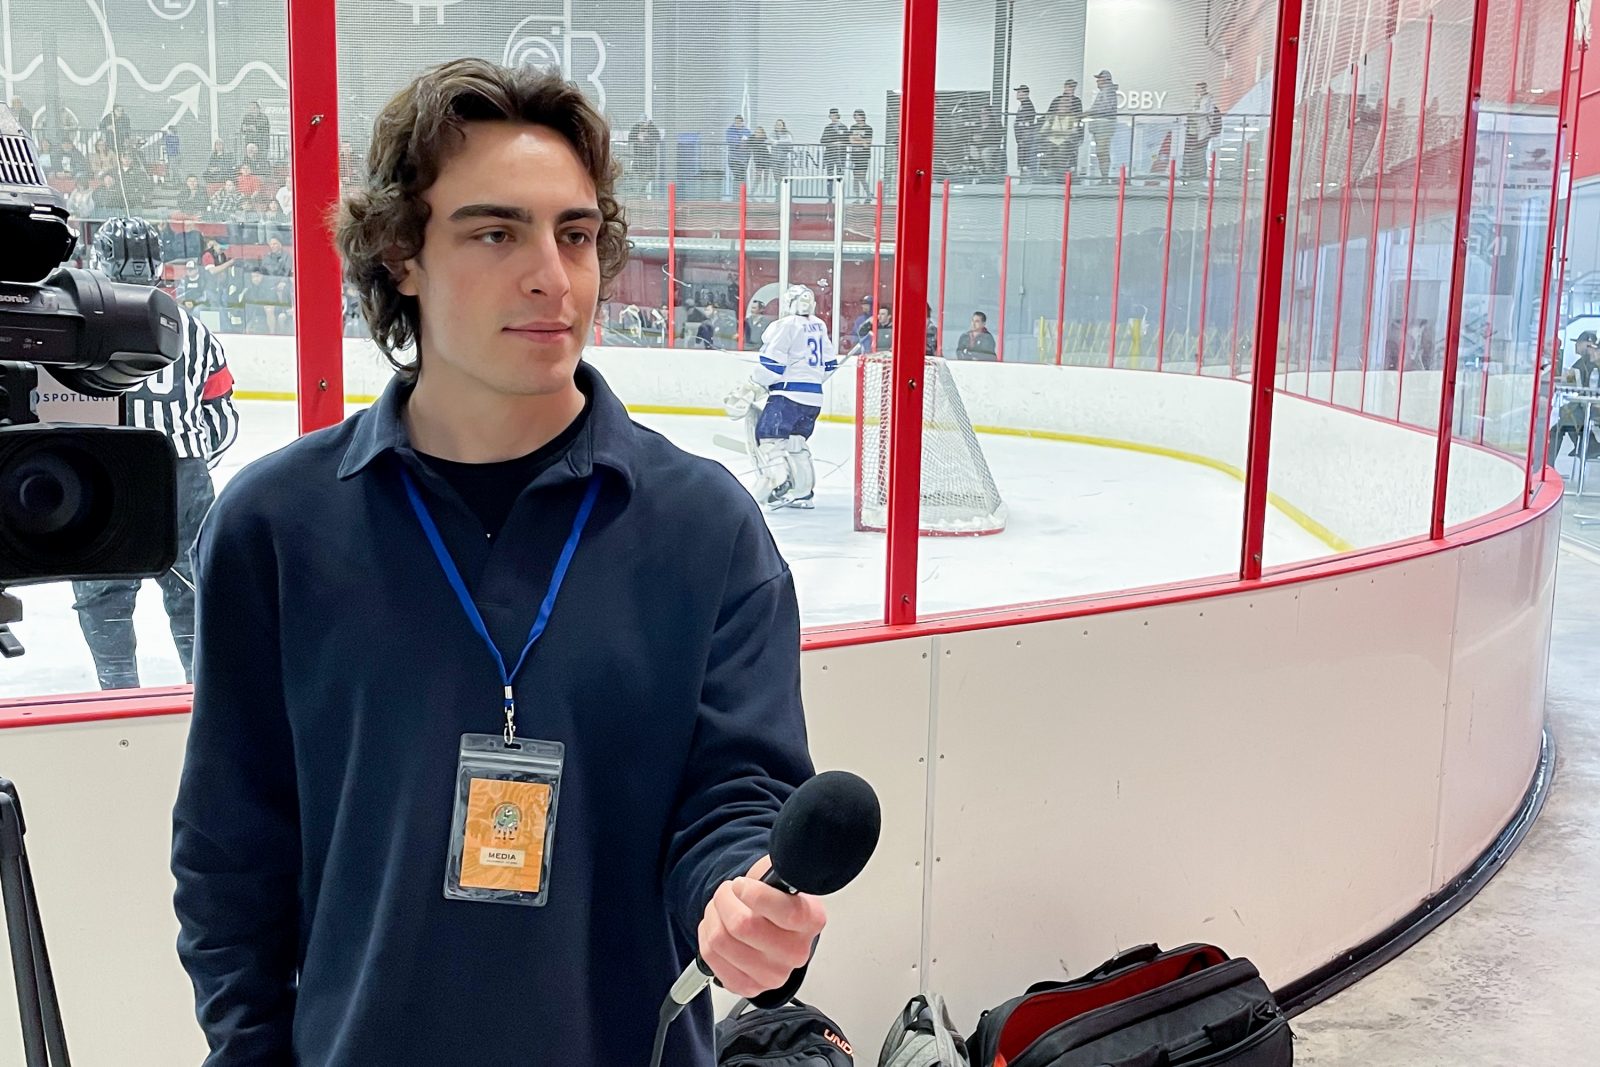 Brock University student Lucas Rotondo stands next to a video camera and holds a microphone in his hand. Behind him is an ice rink with hockey players.